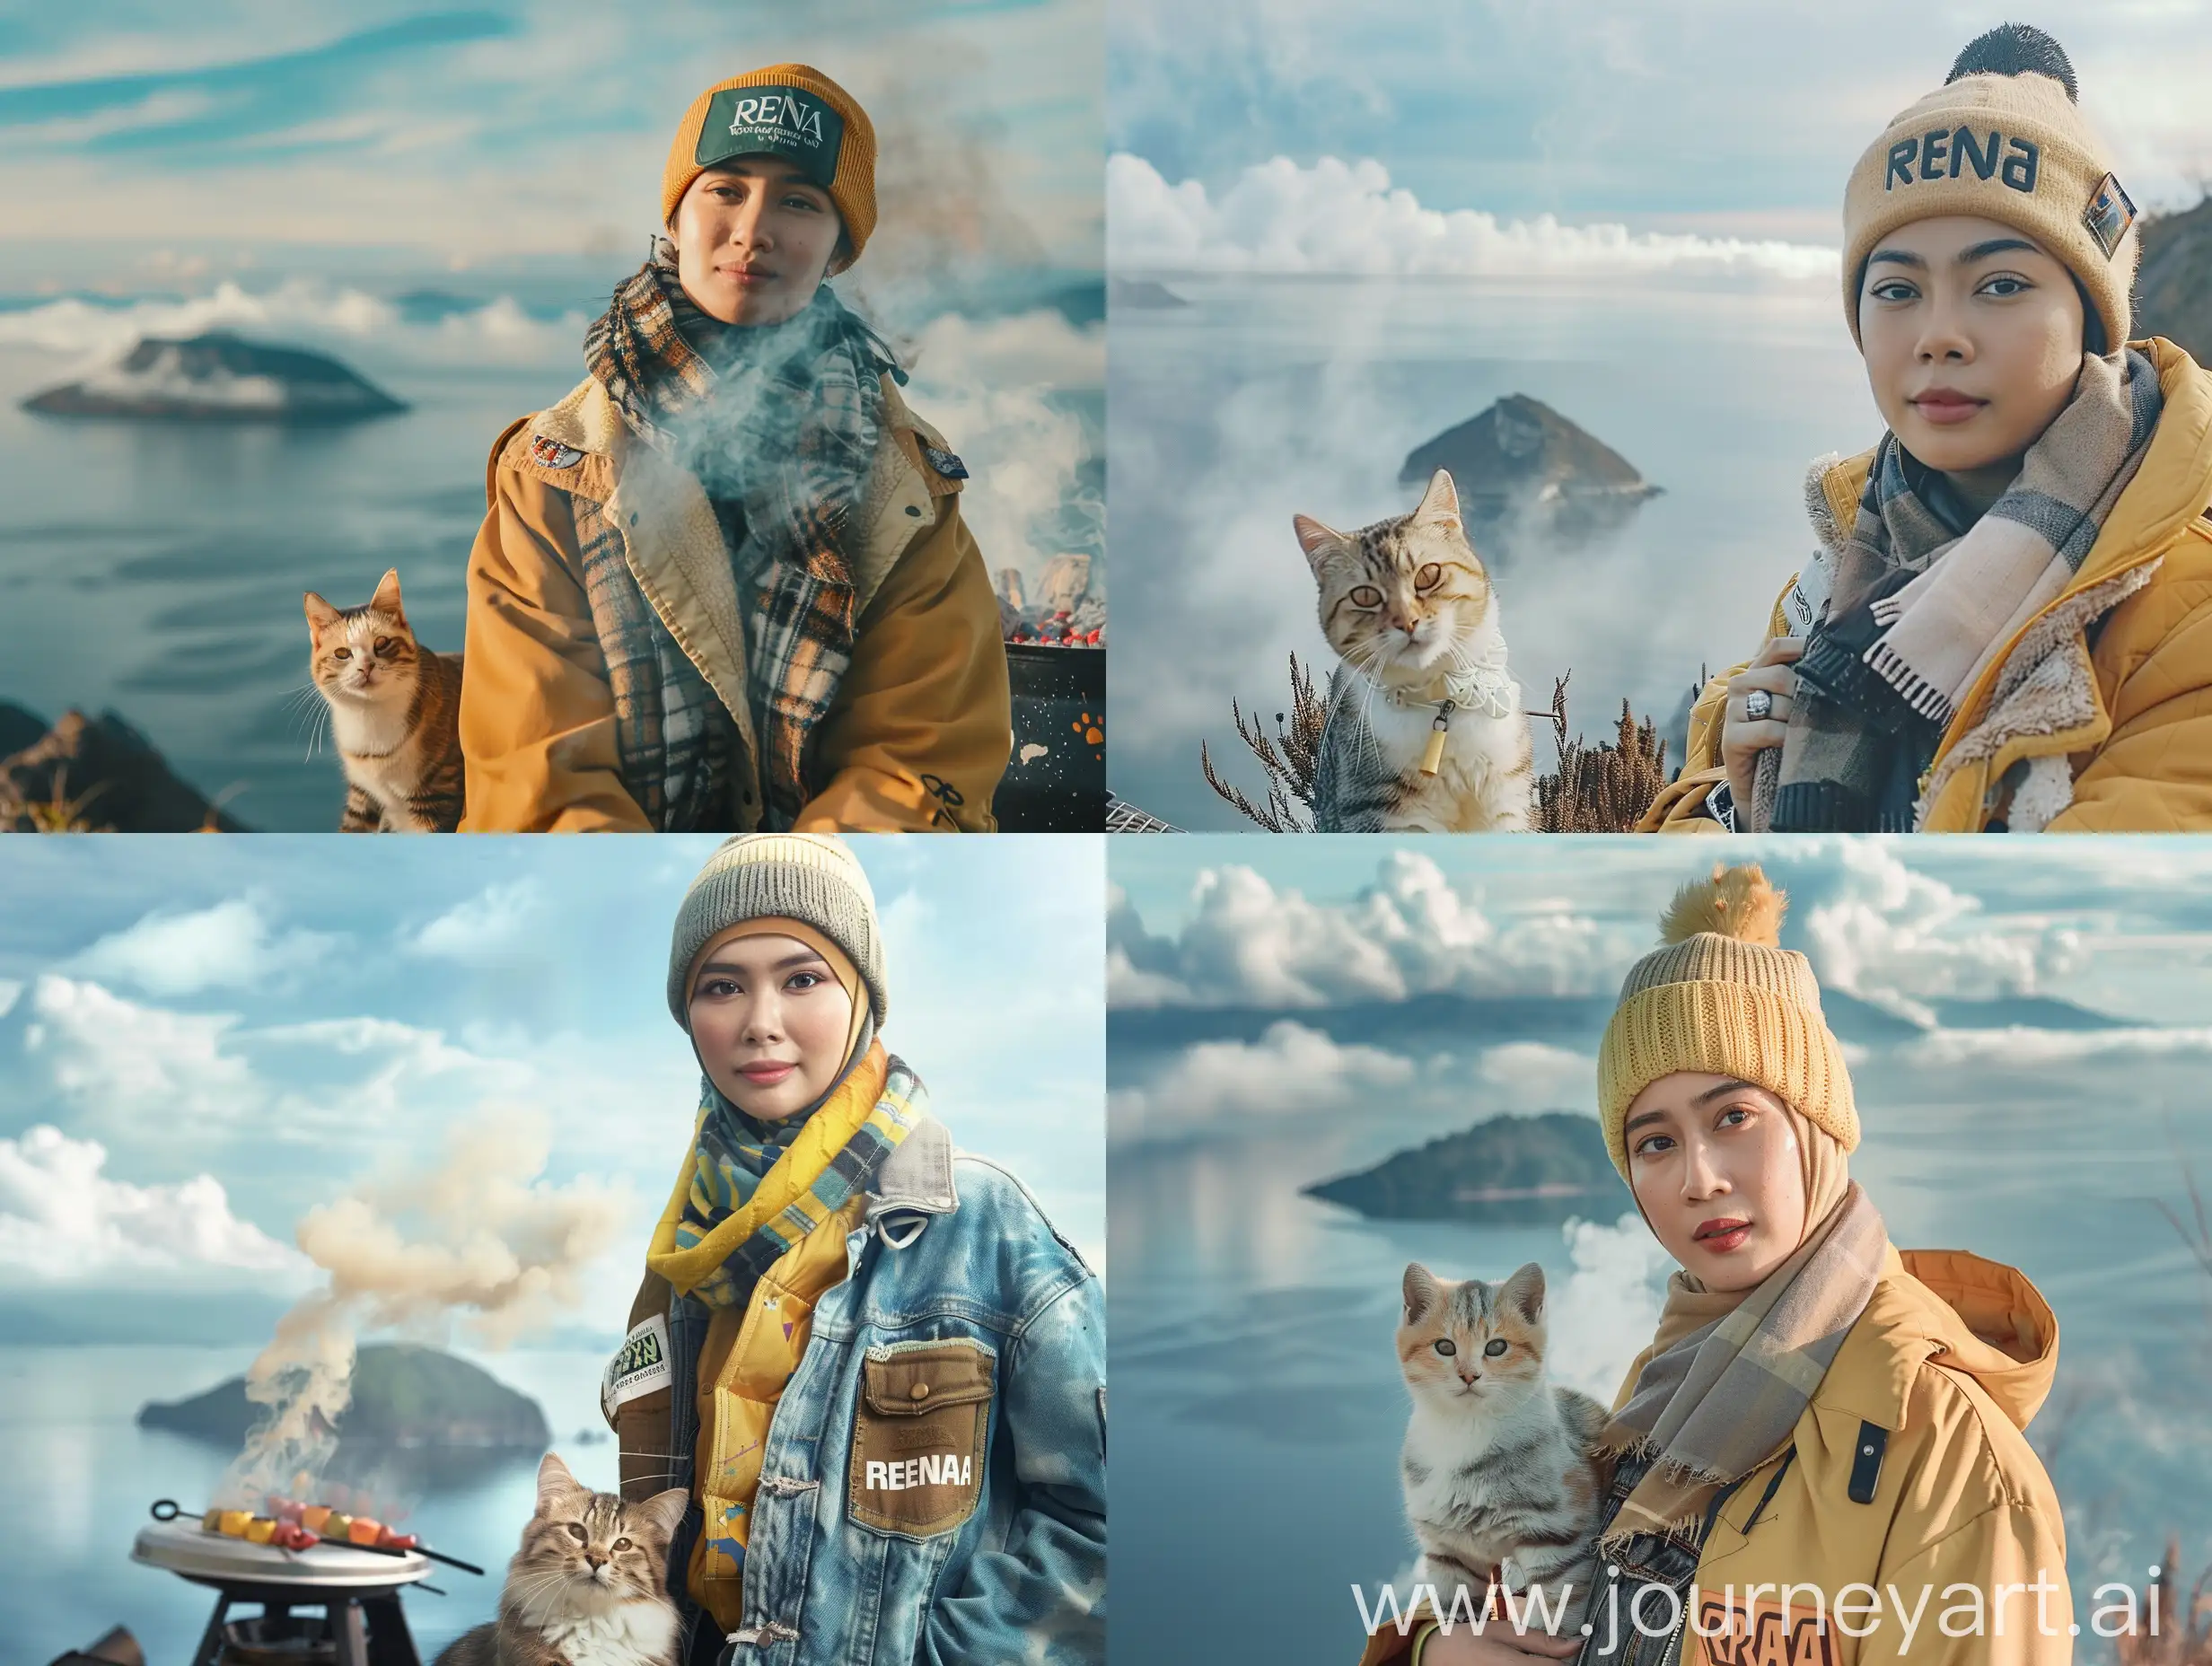 A beautiful 25 year old Indonesian woman wearing a hijab wearing a trucker jacket with a scarf and a beanie hat that says RENA. the woman was with a cute cat wearing a yellow outer jacket. the woman was grilling skewers on the top of the mountain. The skewers were placed on a charcoal grill. The smoke from the barbecue was increasing. Behind him was a calm sea, with a small island in the distance and clouds and mist in the sky